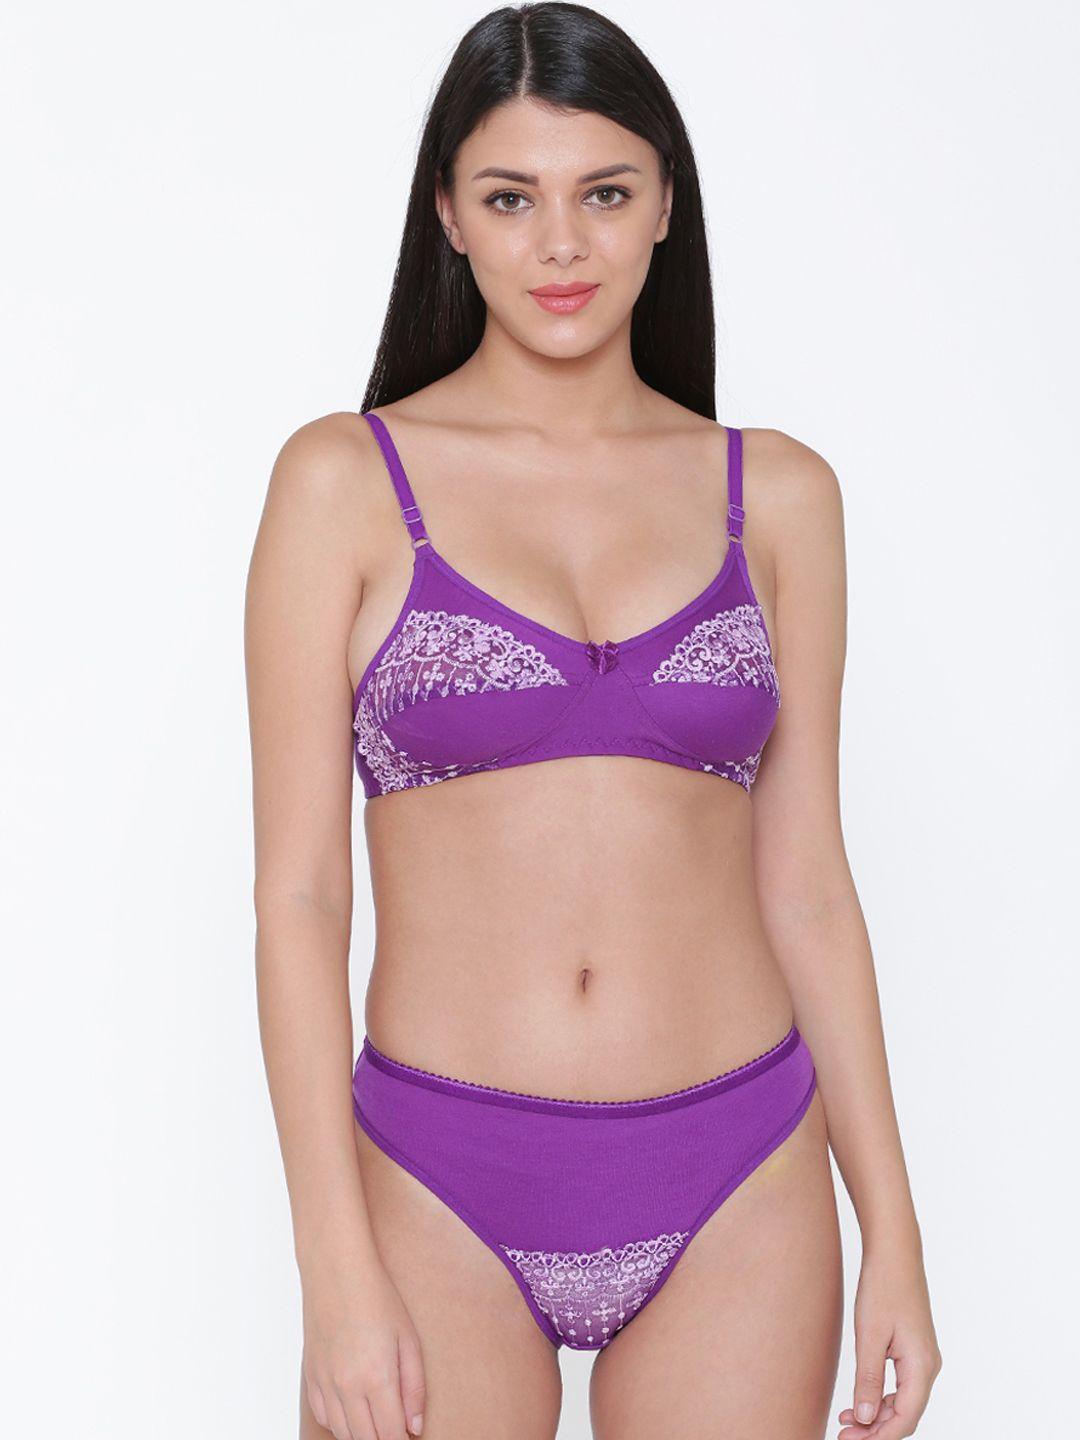 n-gal women purple and white laced lingerie set ntdls05